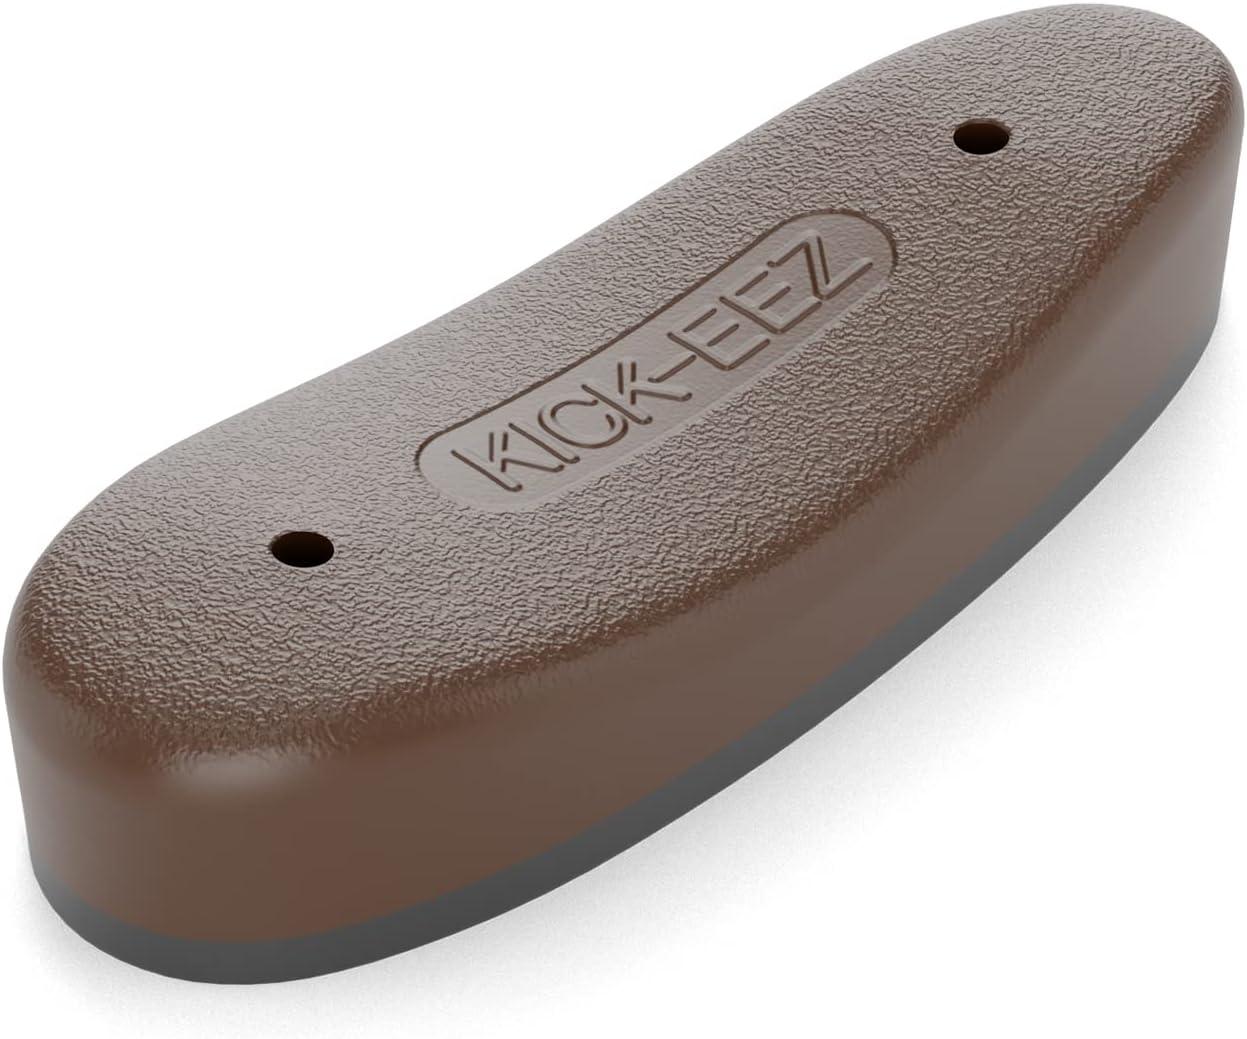 Kick-EEZ Grind to Fit Sorbothane Recoil Pad, Screw-On Backing for Shotgun  or Rifle, Butt Stock Pads for Sporting Clay, Trap, All Purpose (Brown) 2 X  5 5/8 X 15/16 Trap